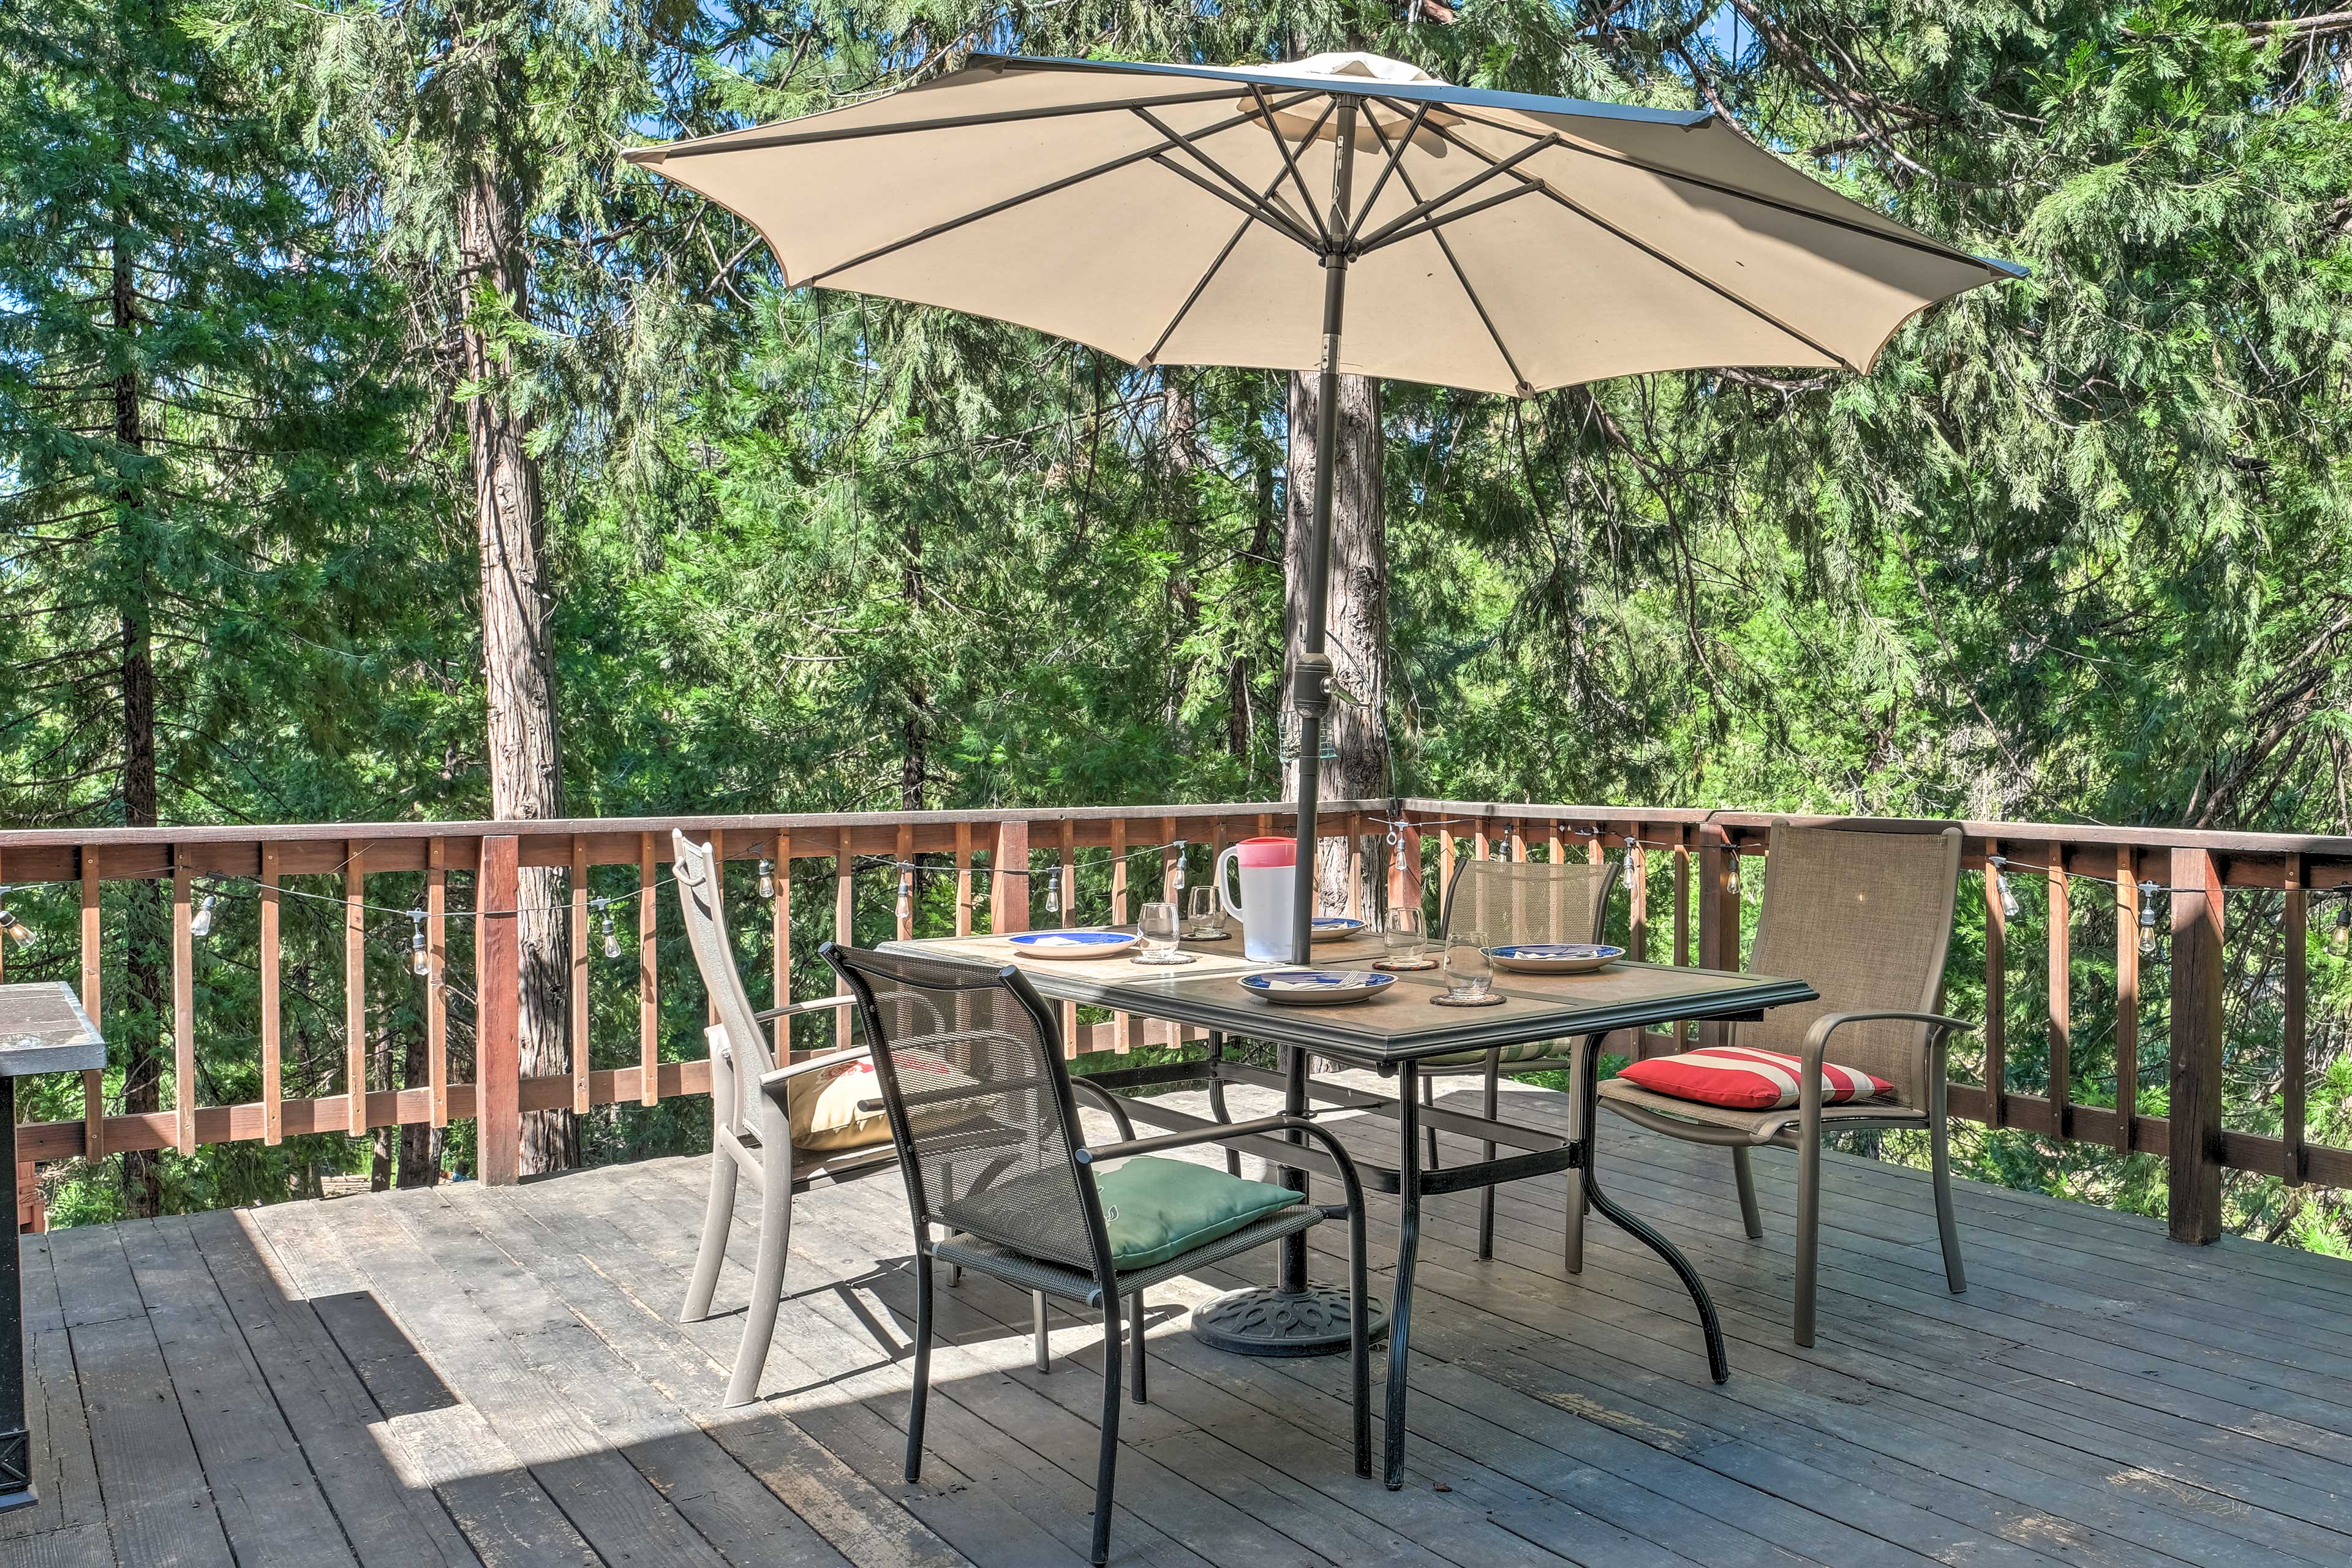 This Twain Harte vacation rental is the perfect place to soak in some sun.